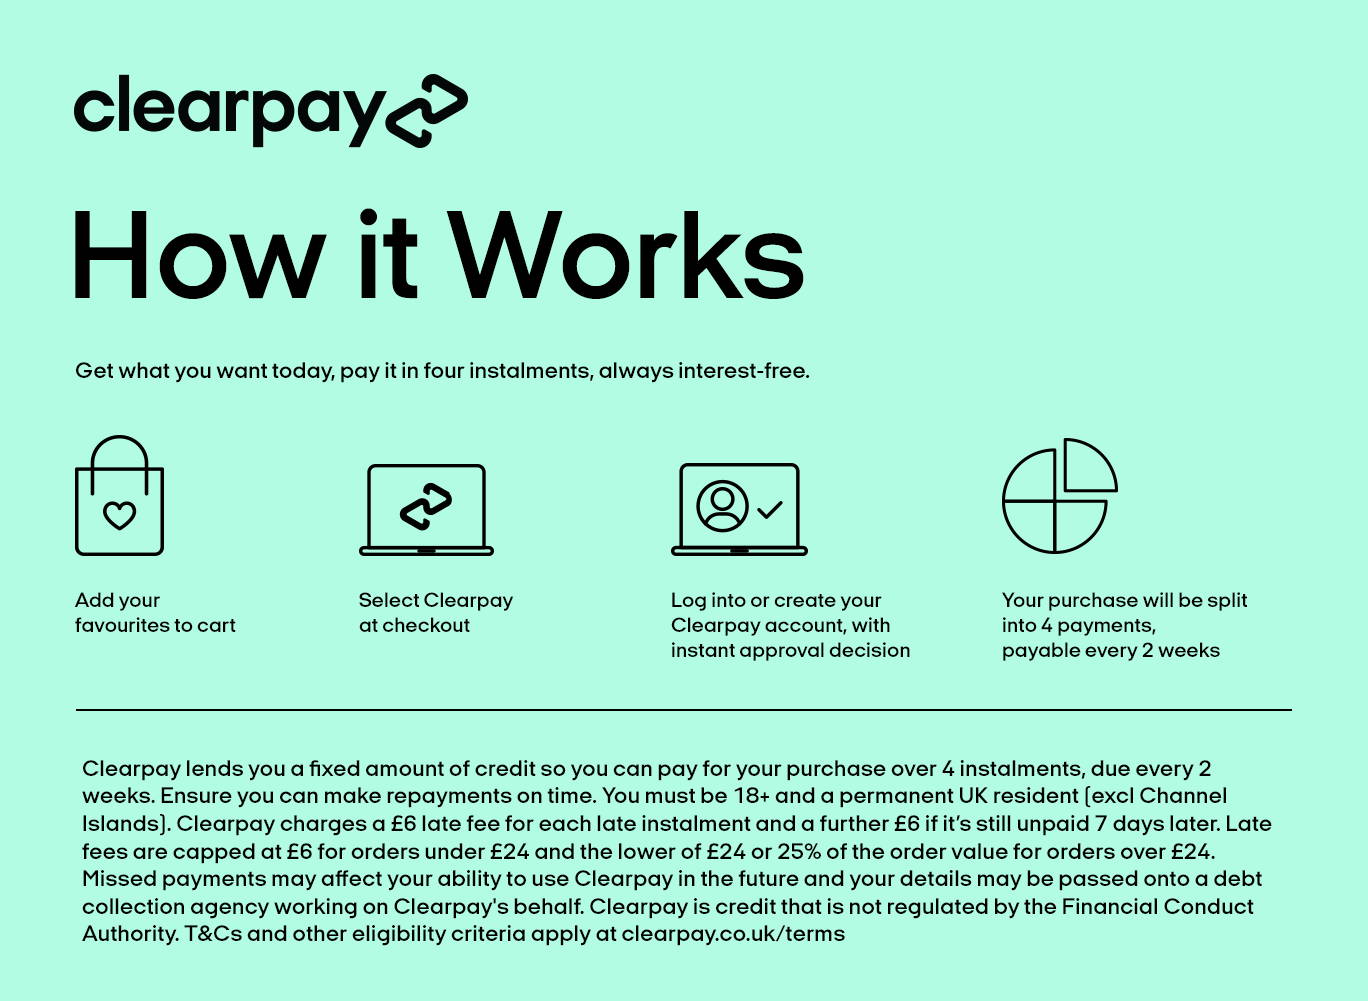 Clearpay how it works